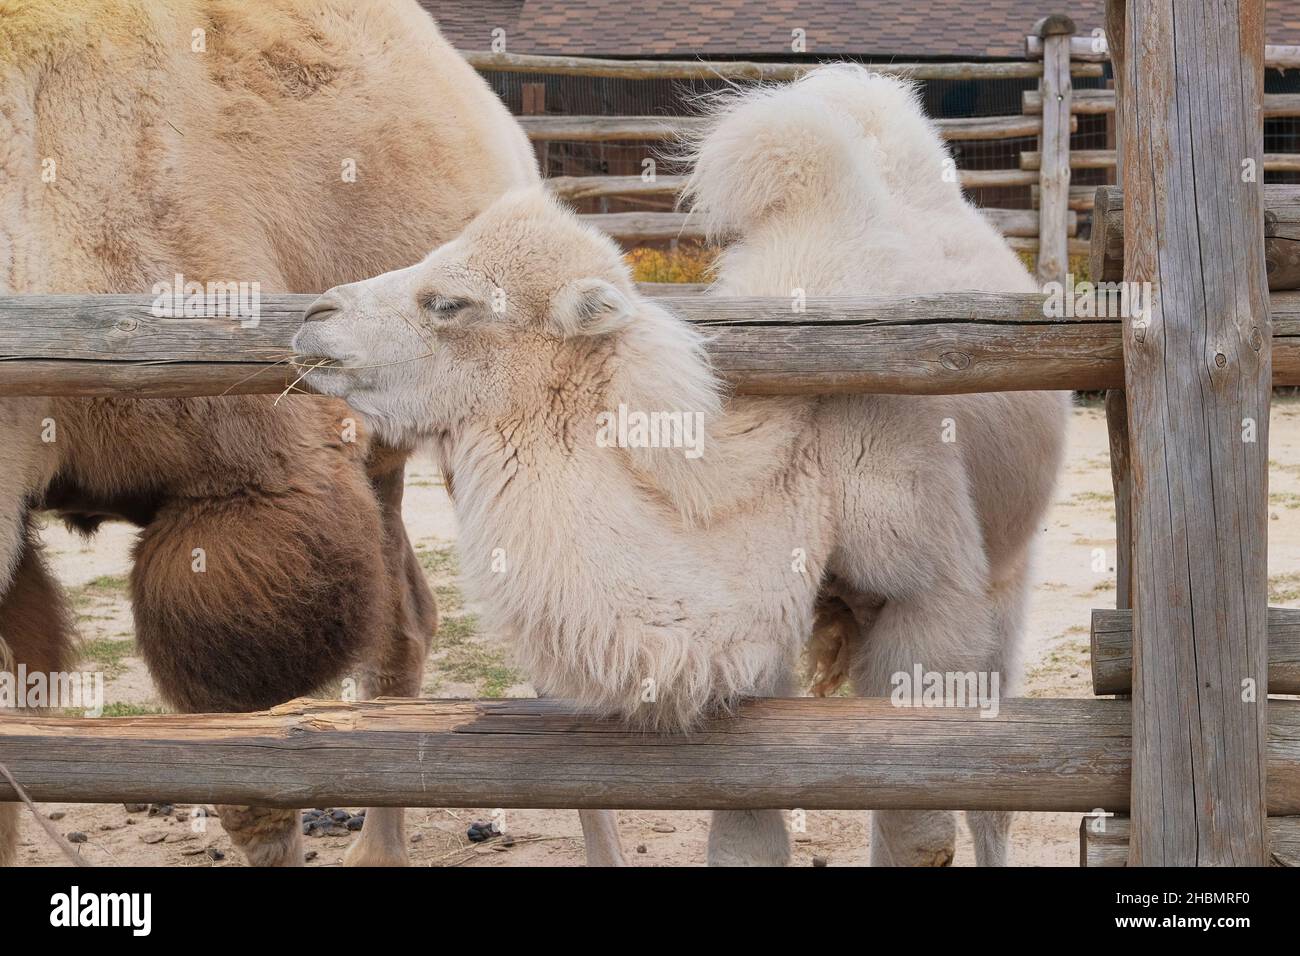 Little bactrian white camel eating hay at the zoo, close up. Keeping wild animals in zoological parks. Stock Photo